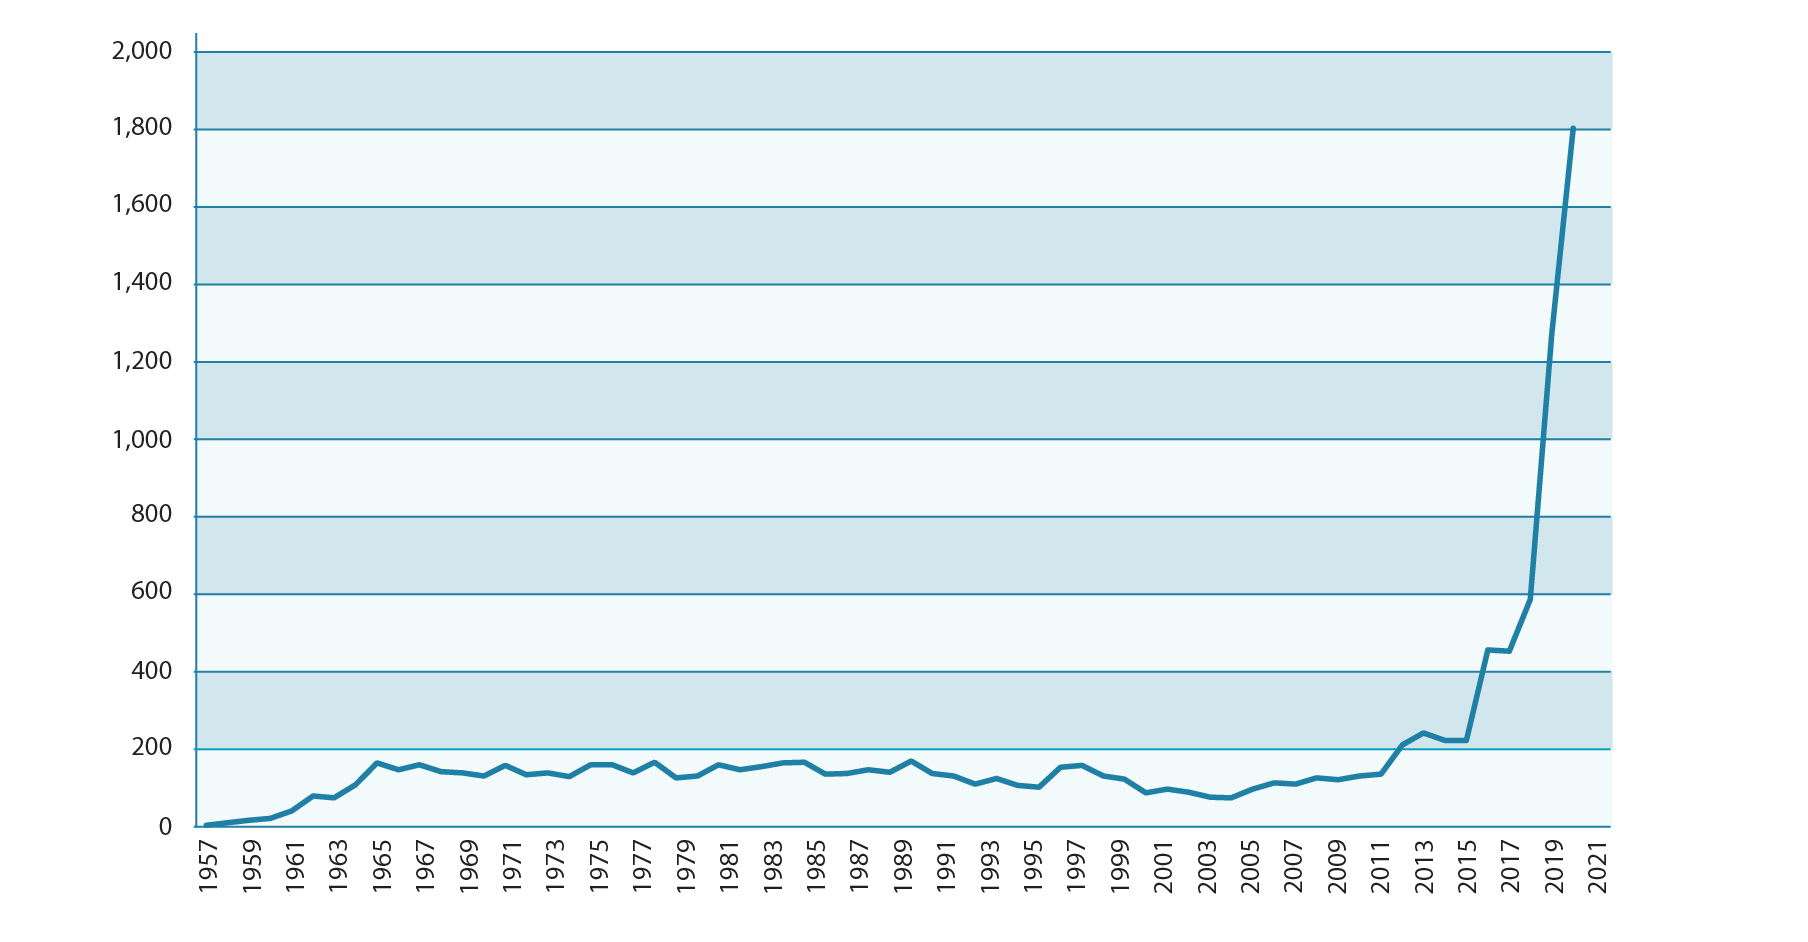 Line graph showing number of space objects registered with the UN from 1957 to 2021